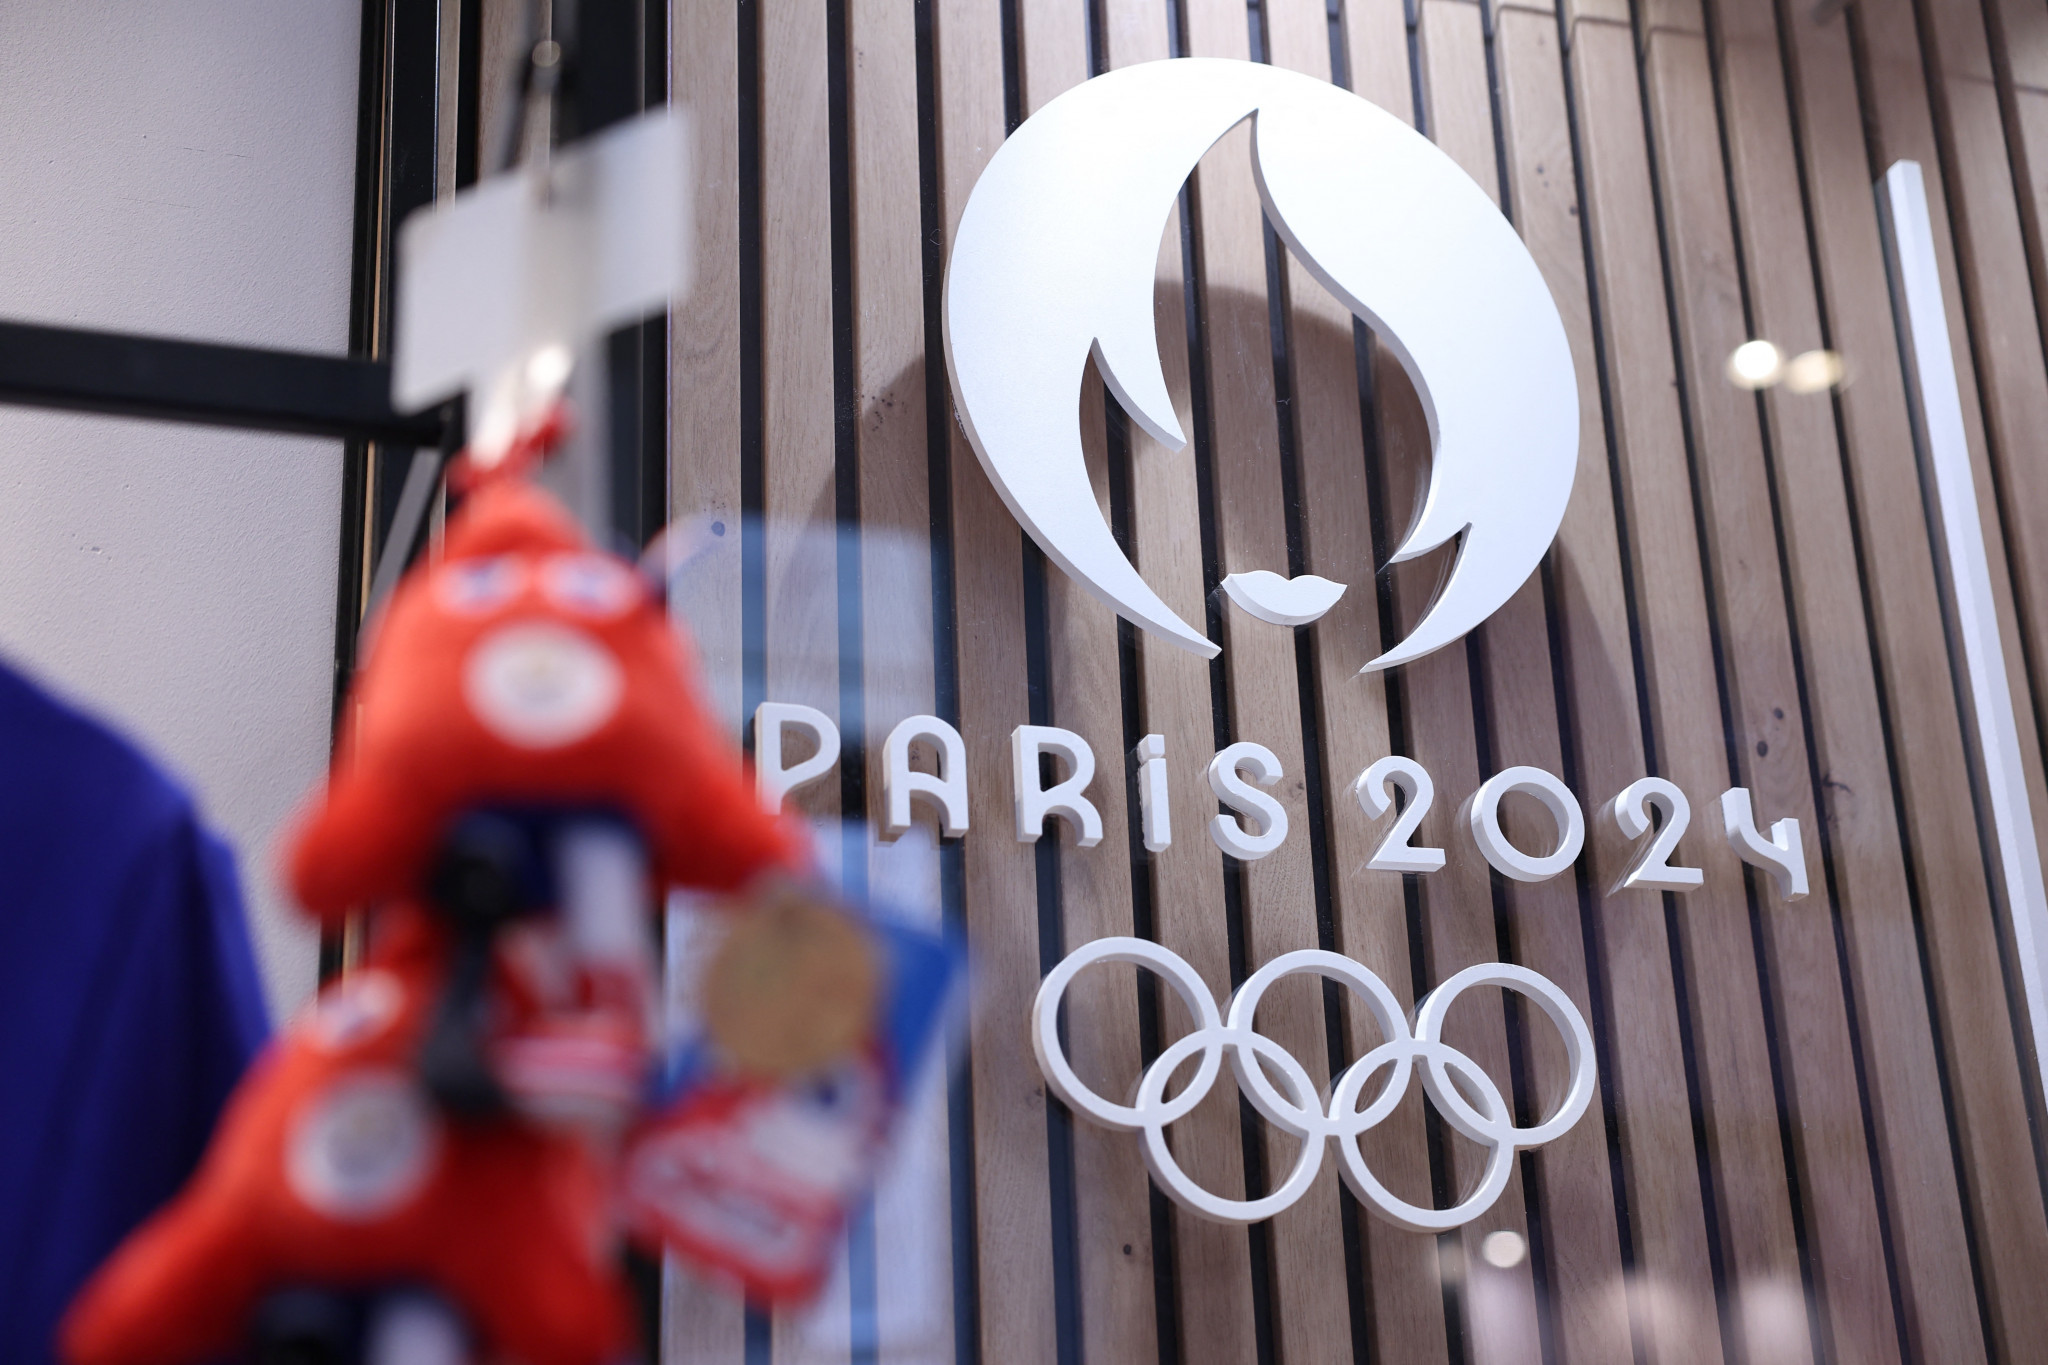 Paris 2024's sports director Jean-Philippe Gatien is to step down from his position ©Getty Images